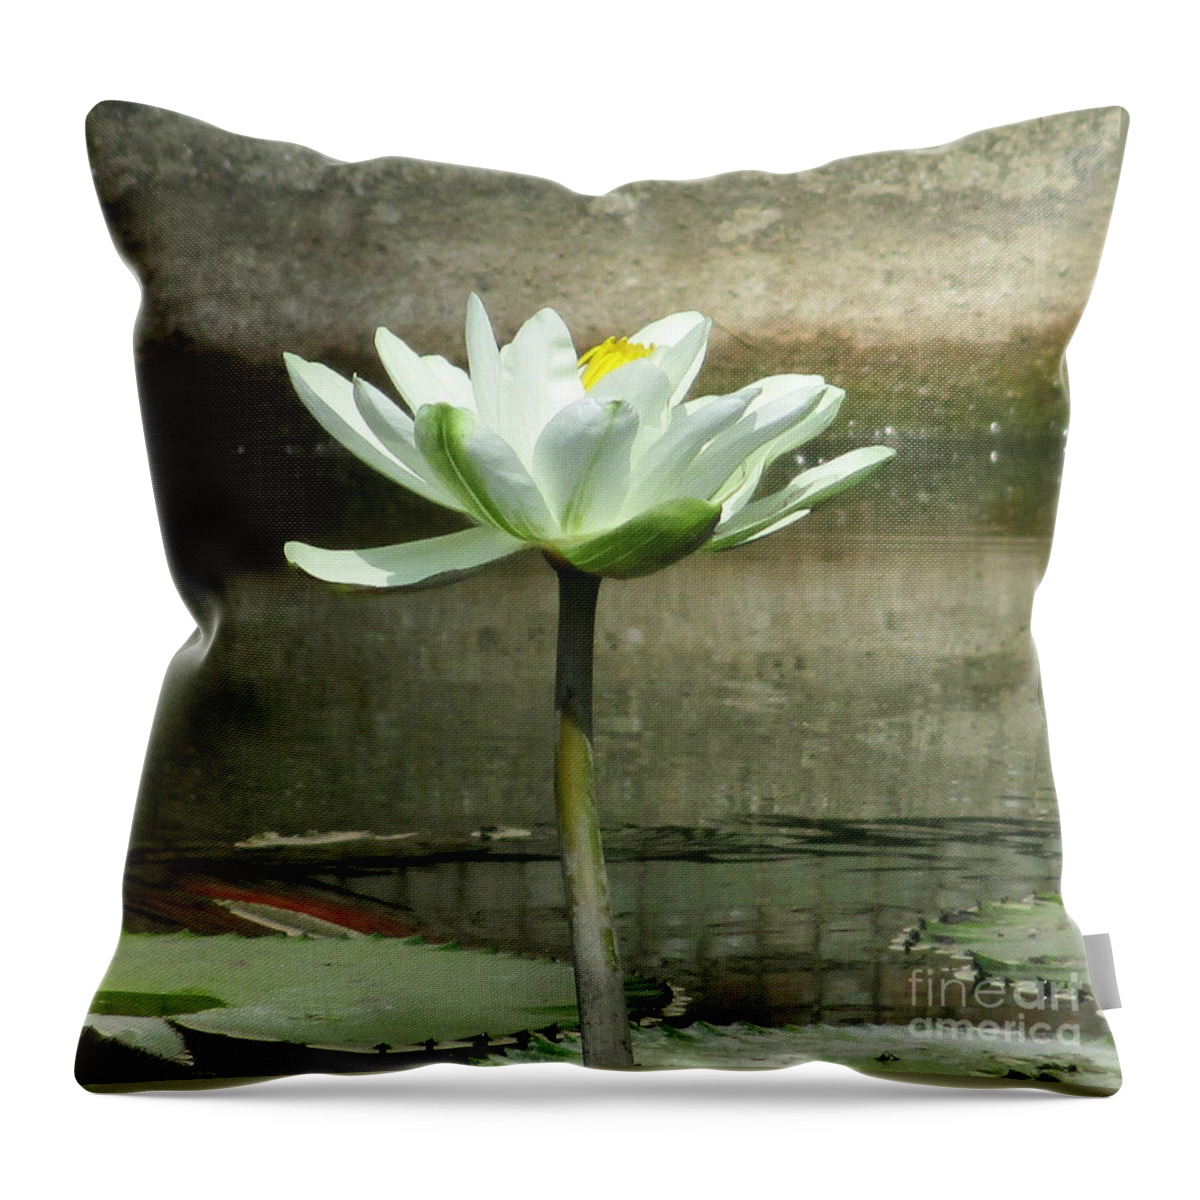 White Water Lilly Throw Pillow featuring the photograph White Water Lily 2 by Randall Weidner